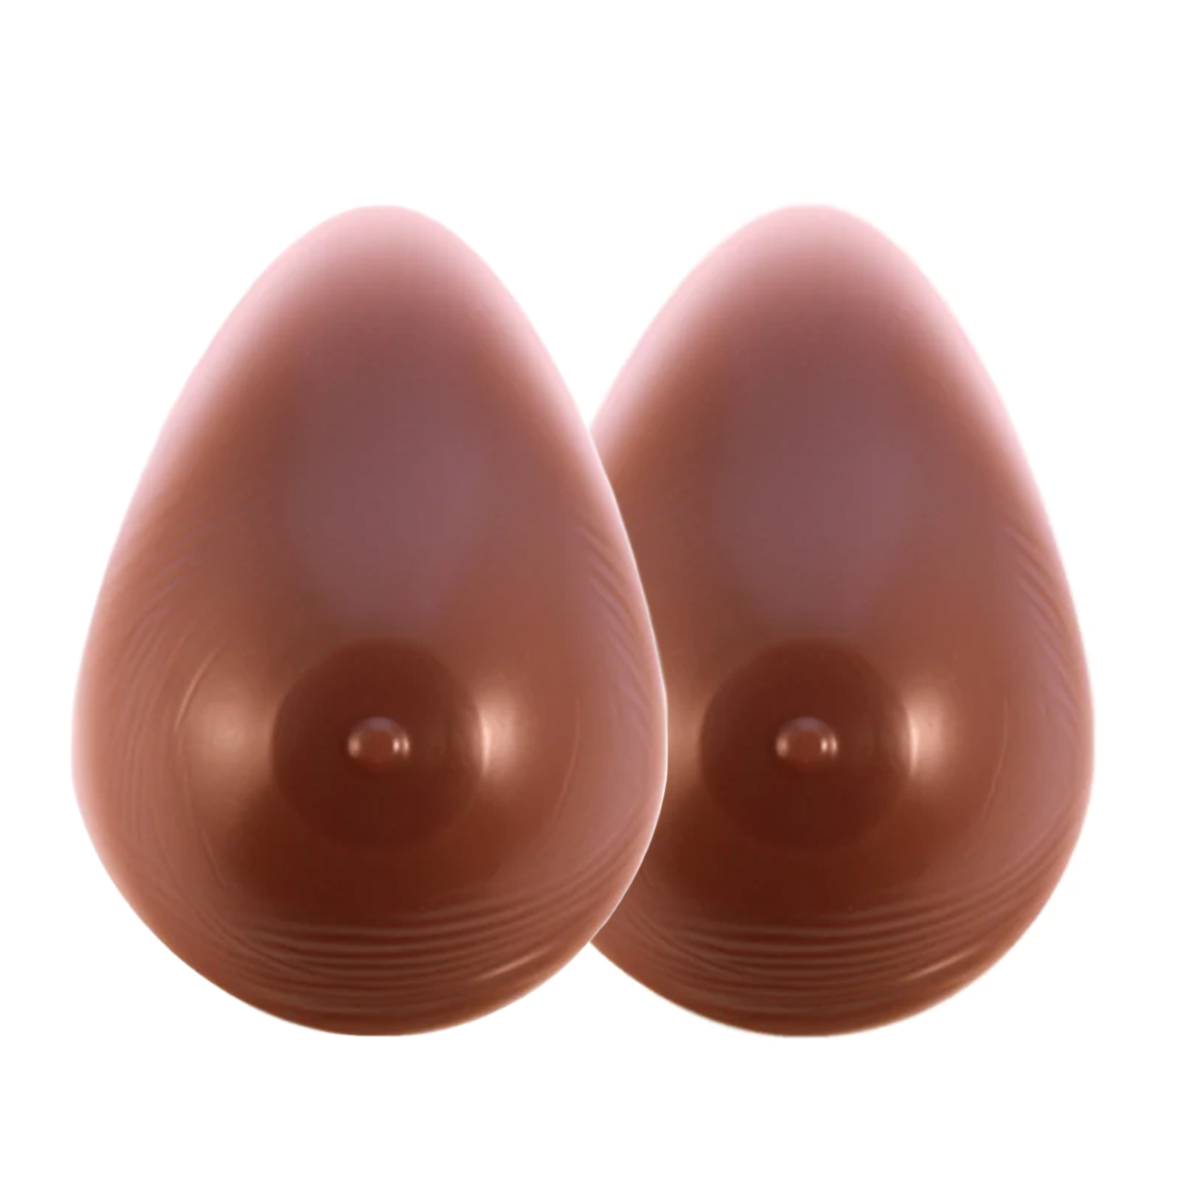 Natural Oval Breast Form: By Transform